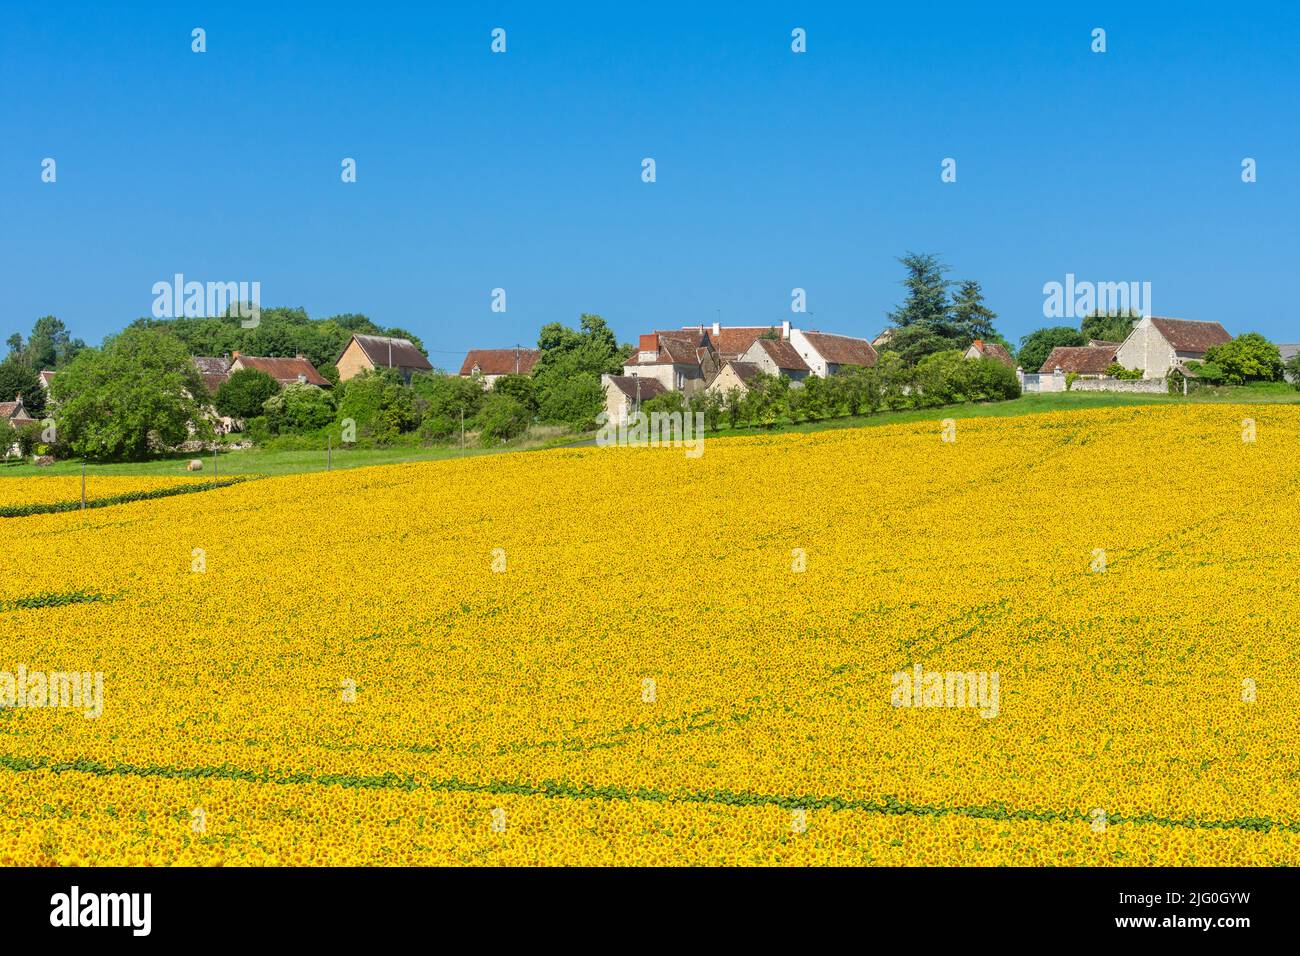 Hill-top village of La Boissiere, Boussay, and field of Sunflowers (Helianthus annuus) growing in the sud-Touraine, central France. Stock Photo